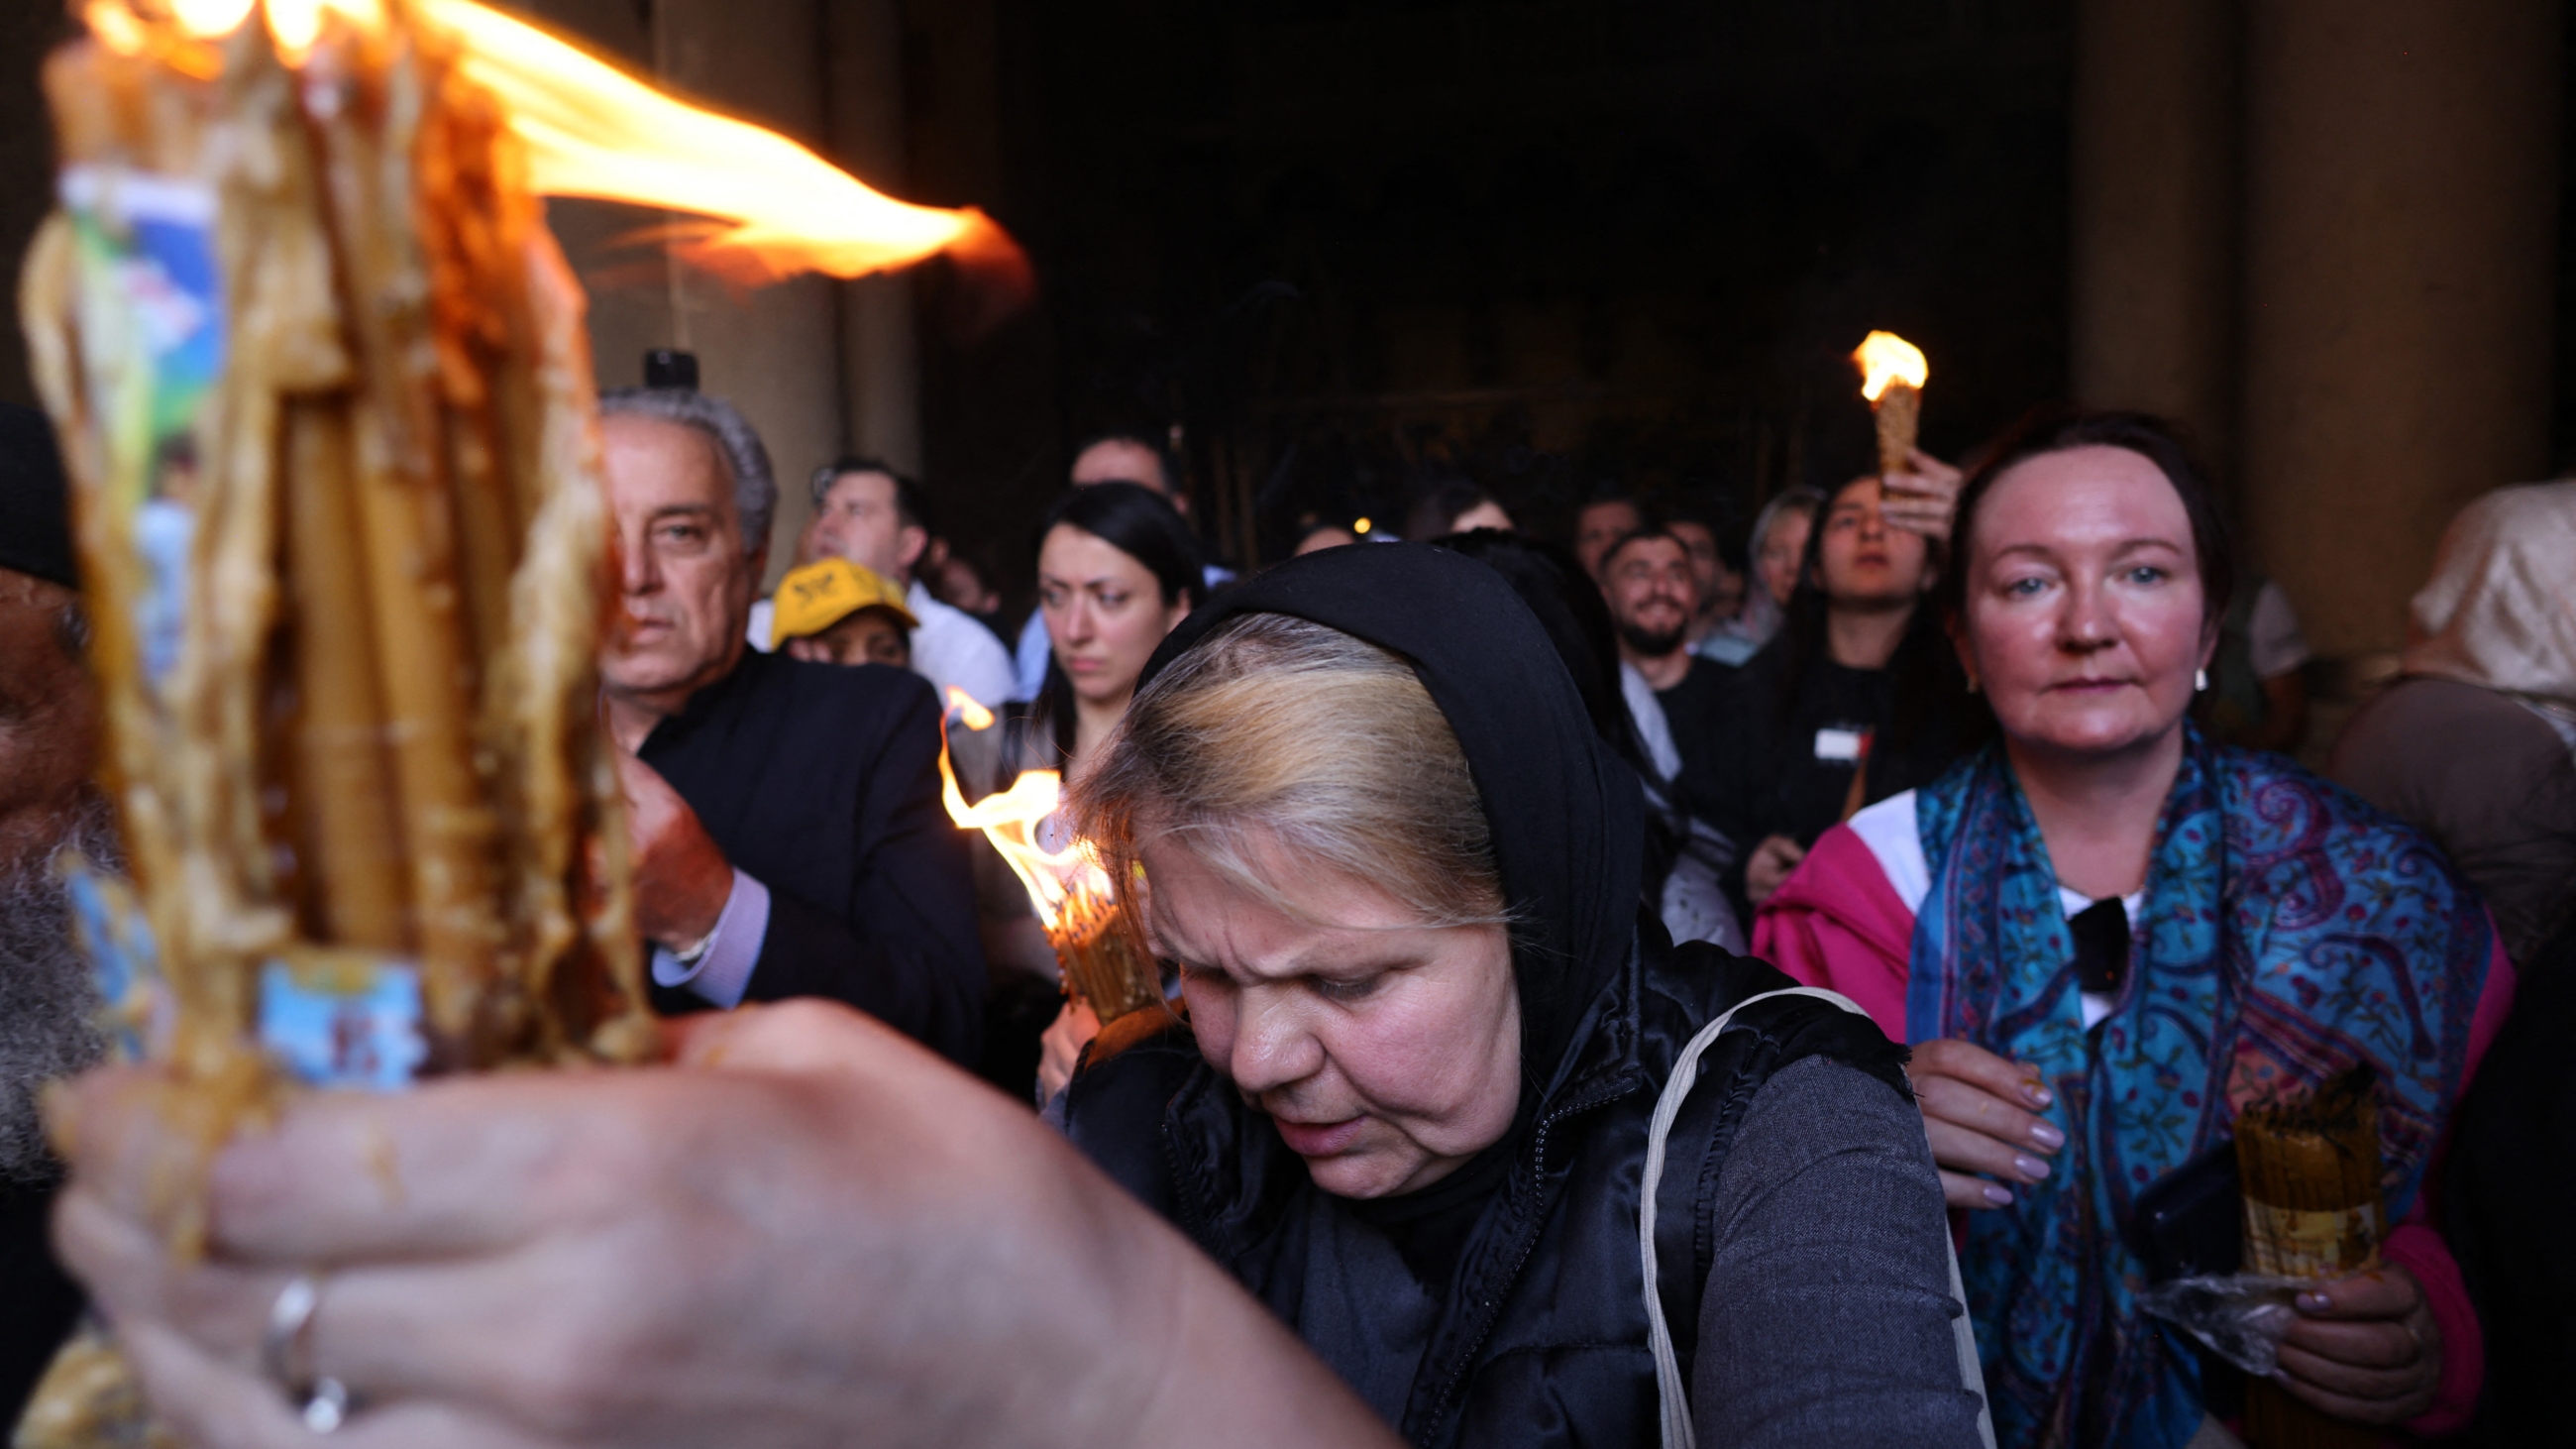 Orthodox Christians gather with lit candles during the Holy Fire ceremony at the Holy Sepulchre church in Jerusalem's Old City on 15 April 2023 (AFP)